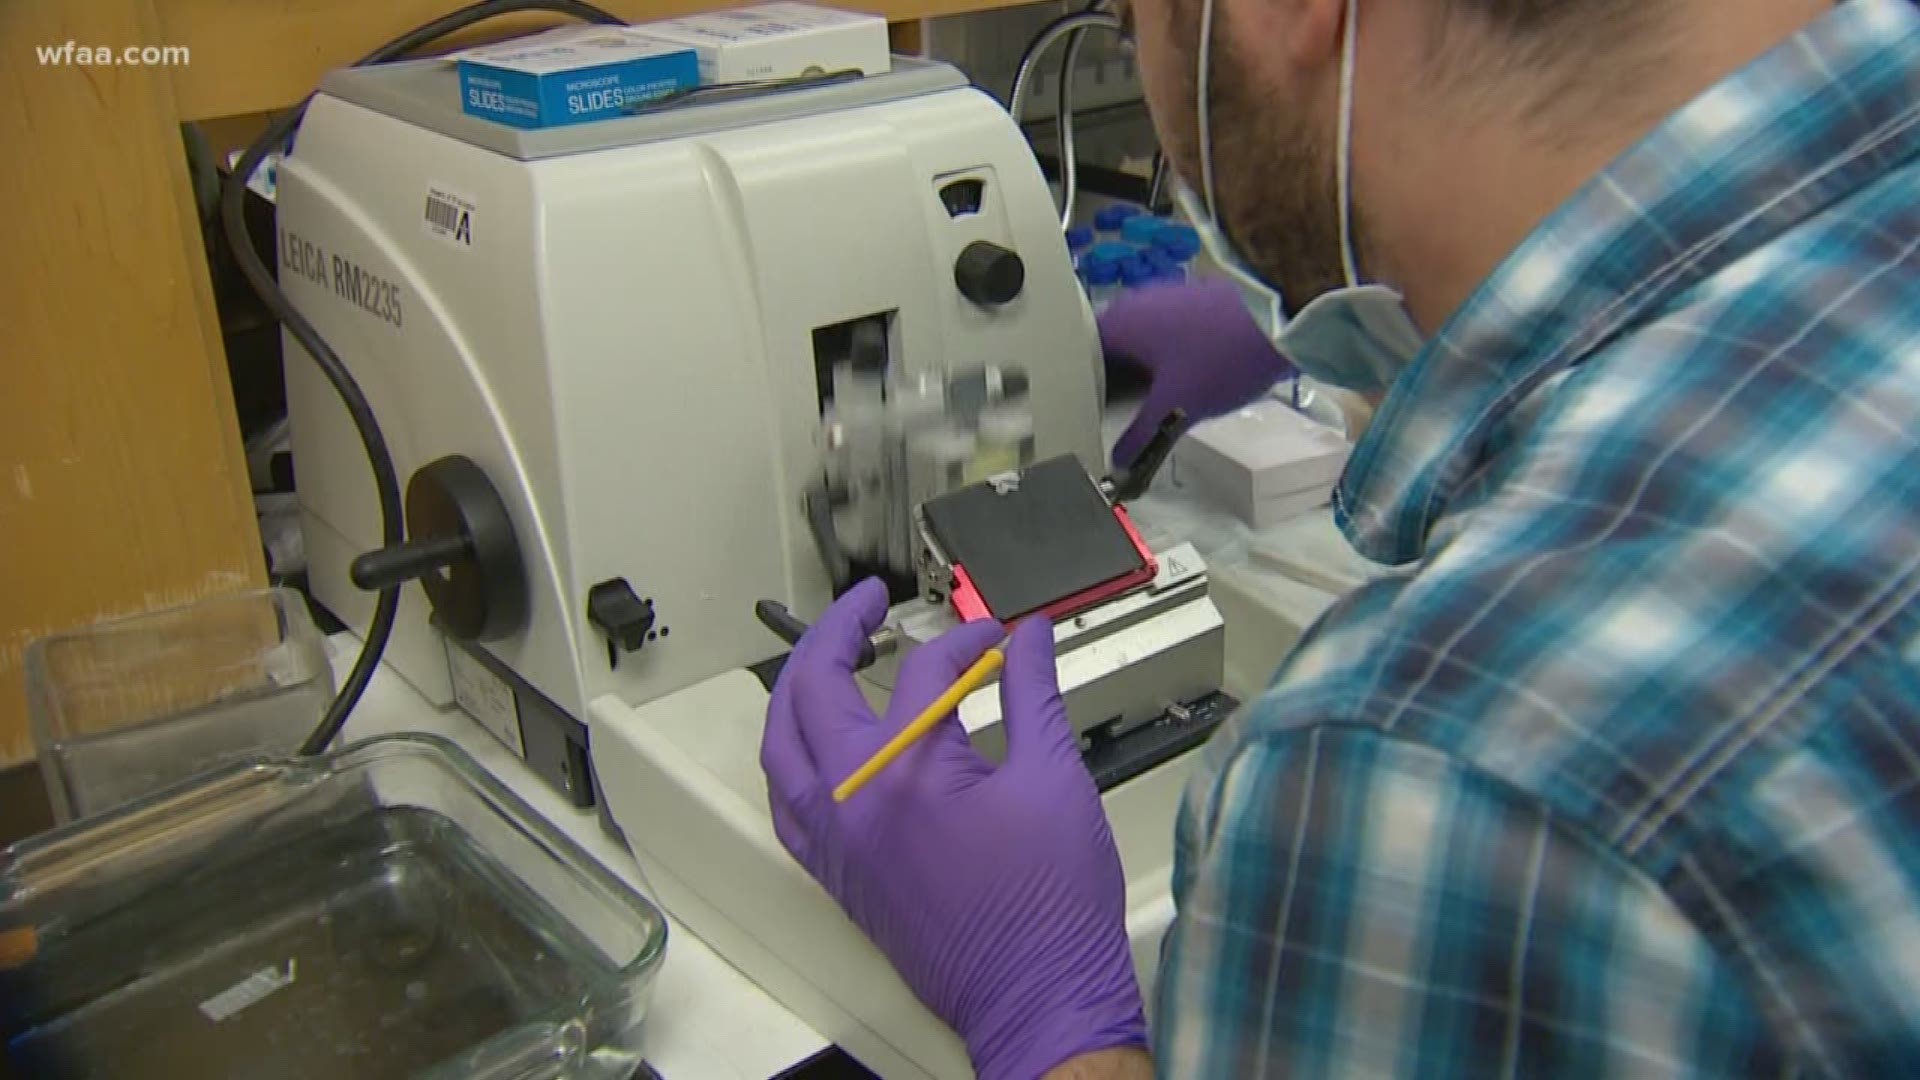 'Roach motel' for cancer cells: How UTA research could change cancer treatment